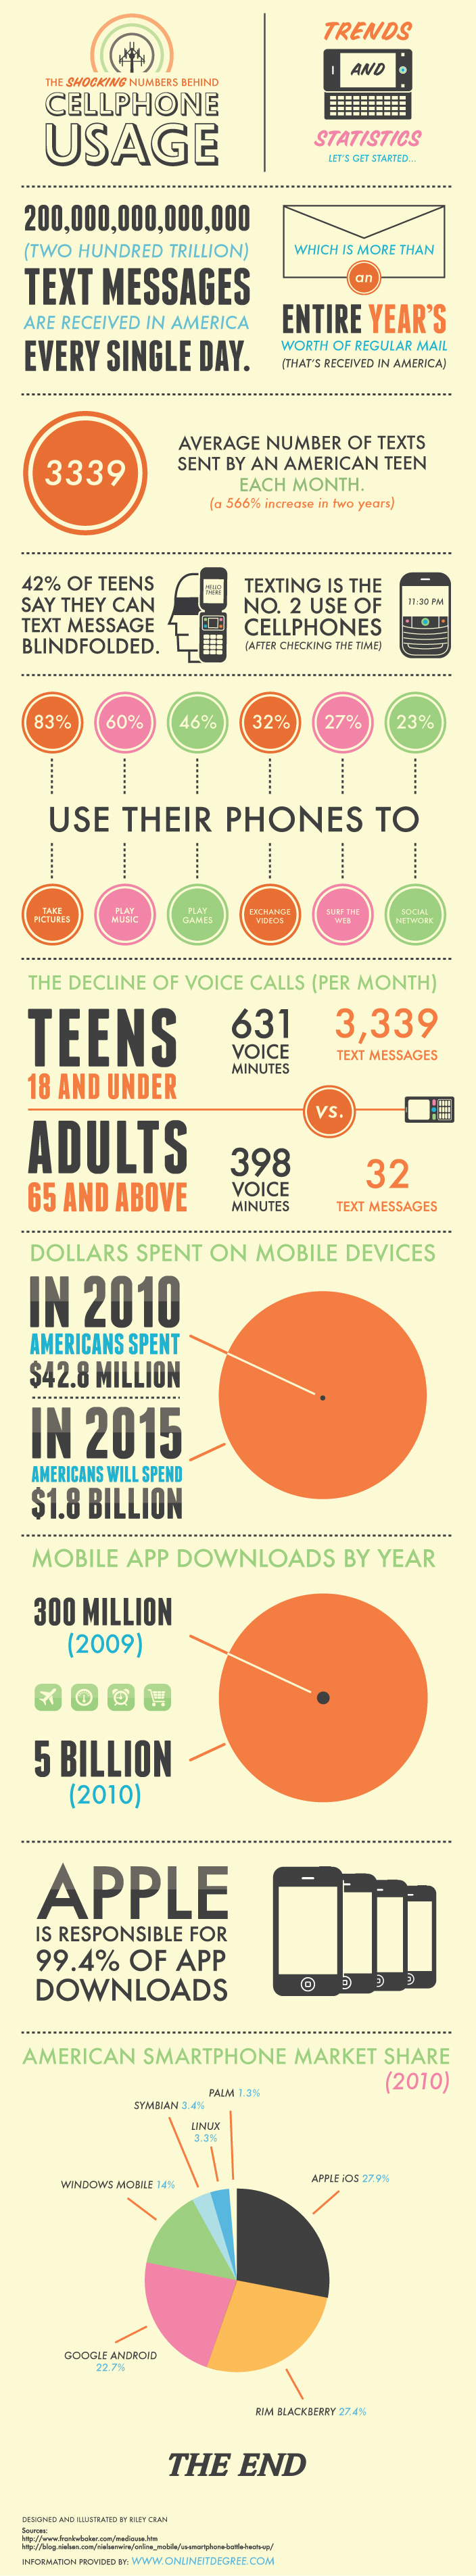 American Cell Phone Statistics and Usage